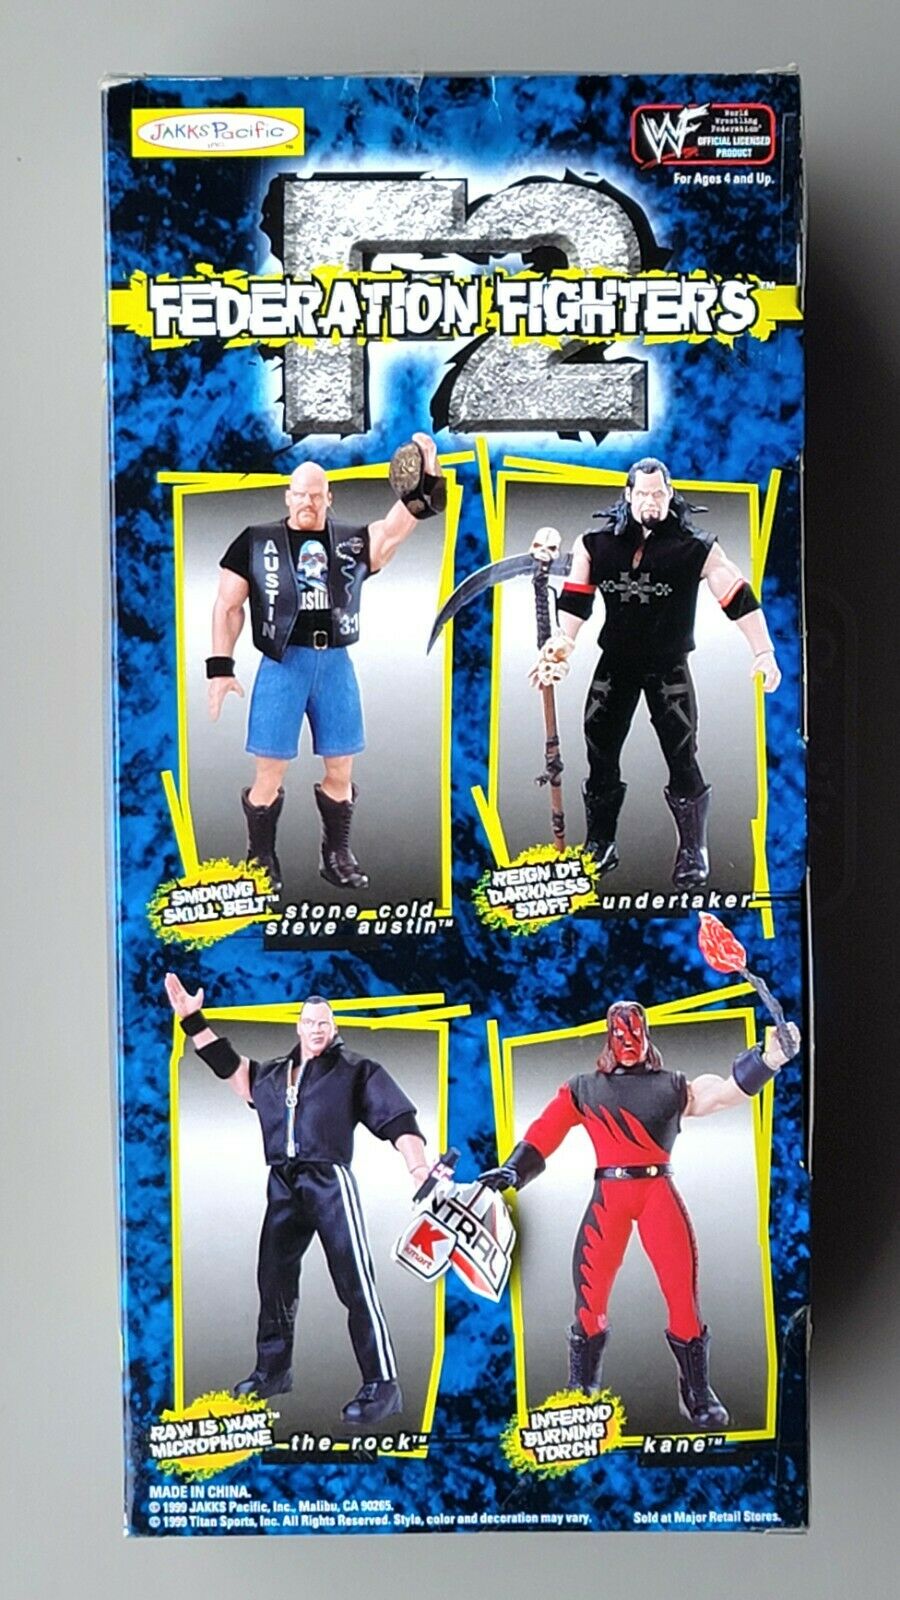 1999 WWF Jakks Pacific 12" Federation Fighters Series 1 Stone Cold Steve Austin [In Jeans]